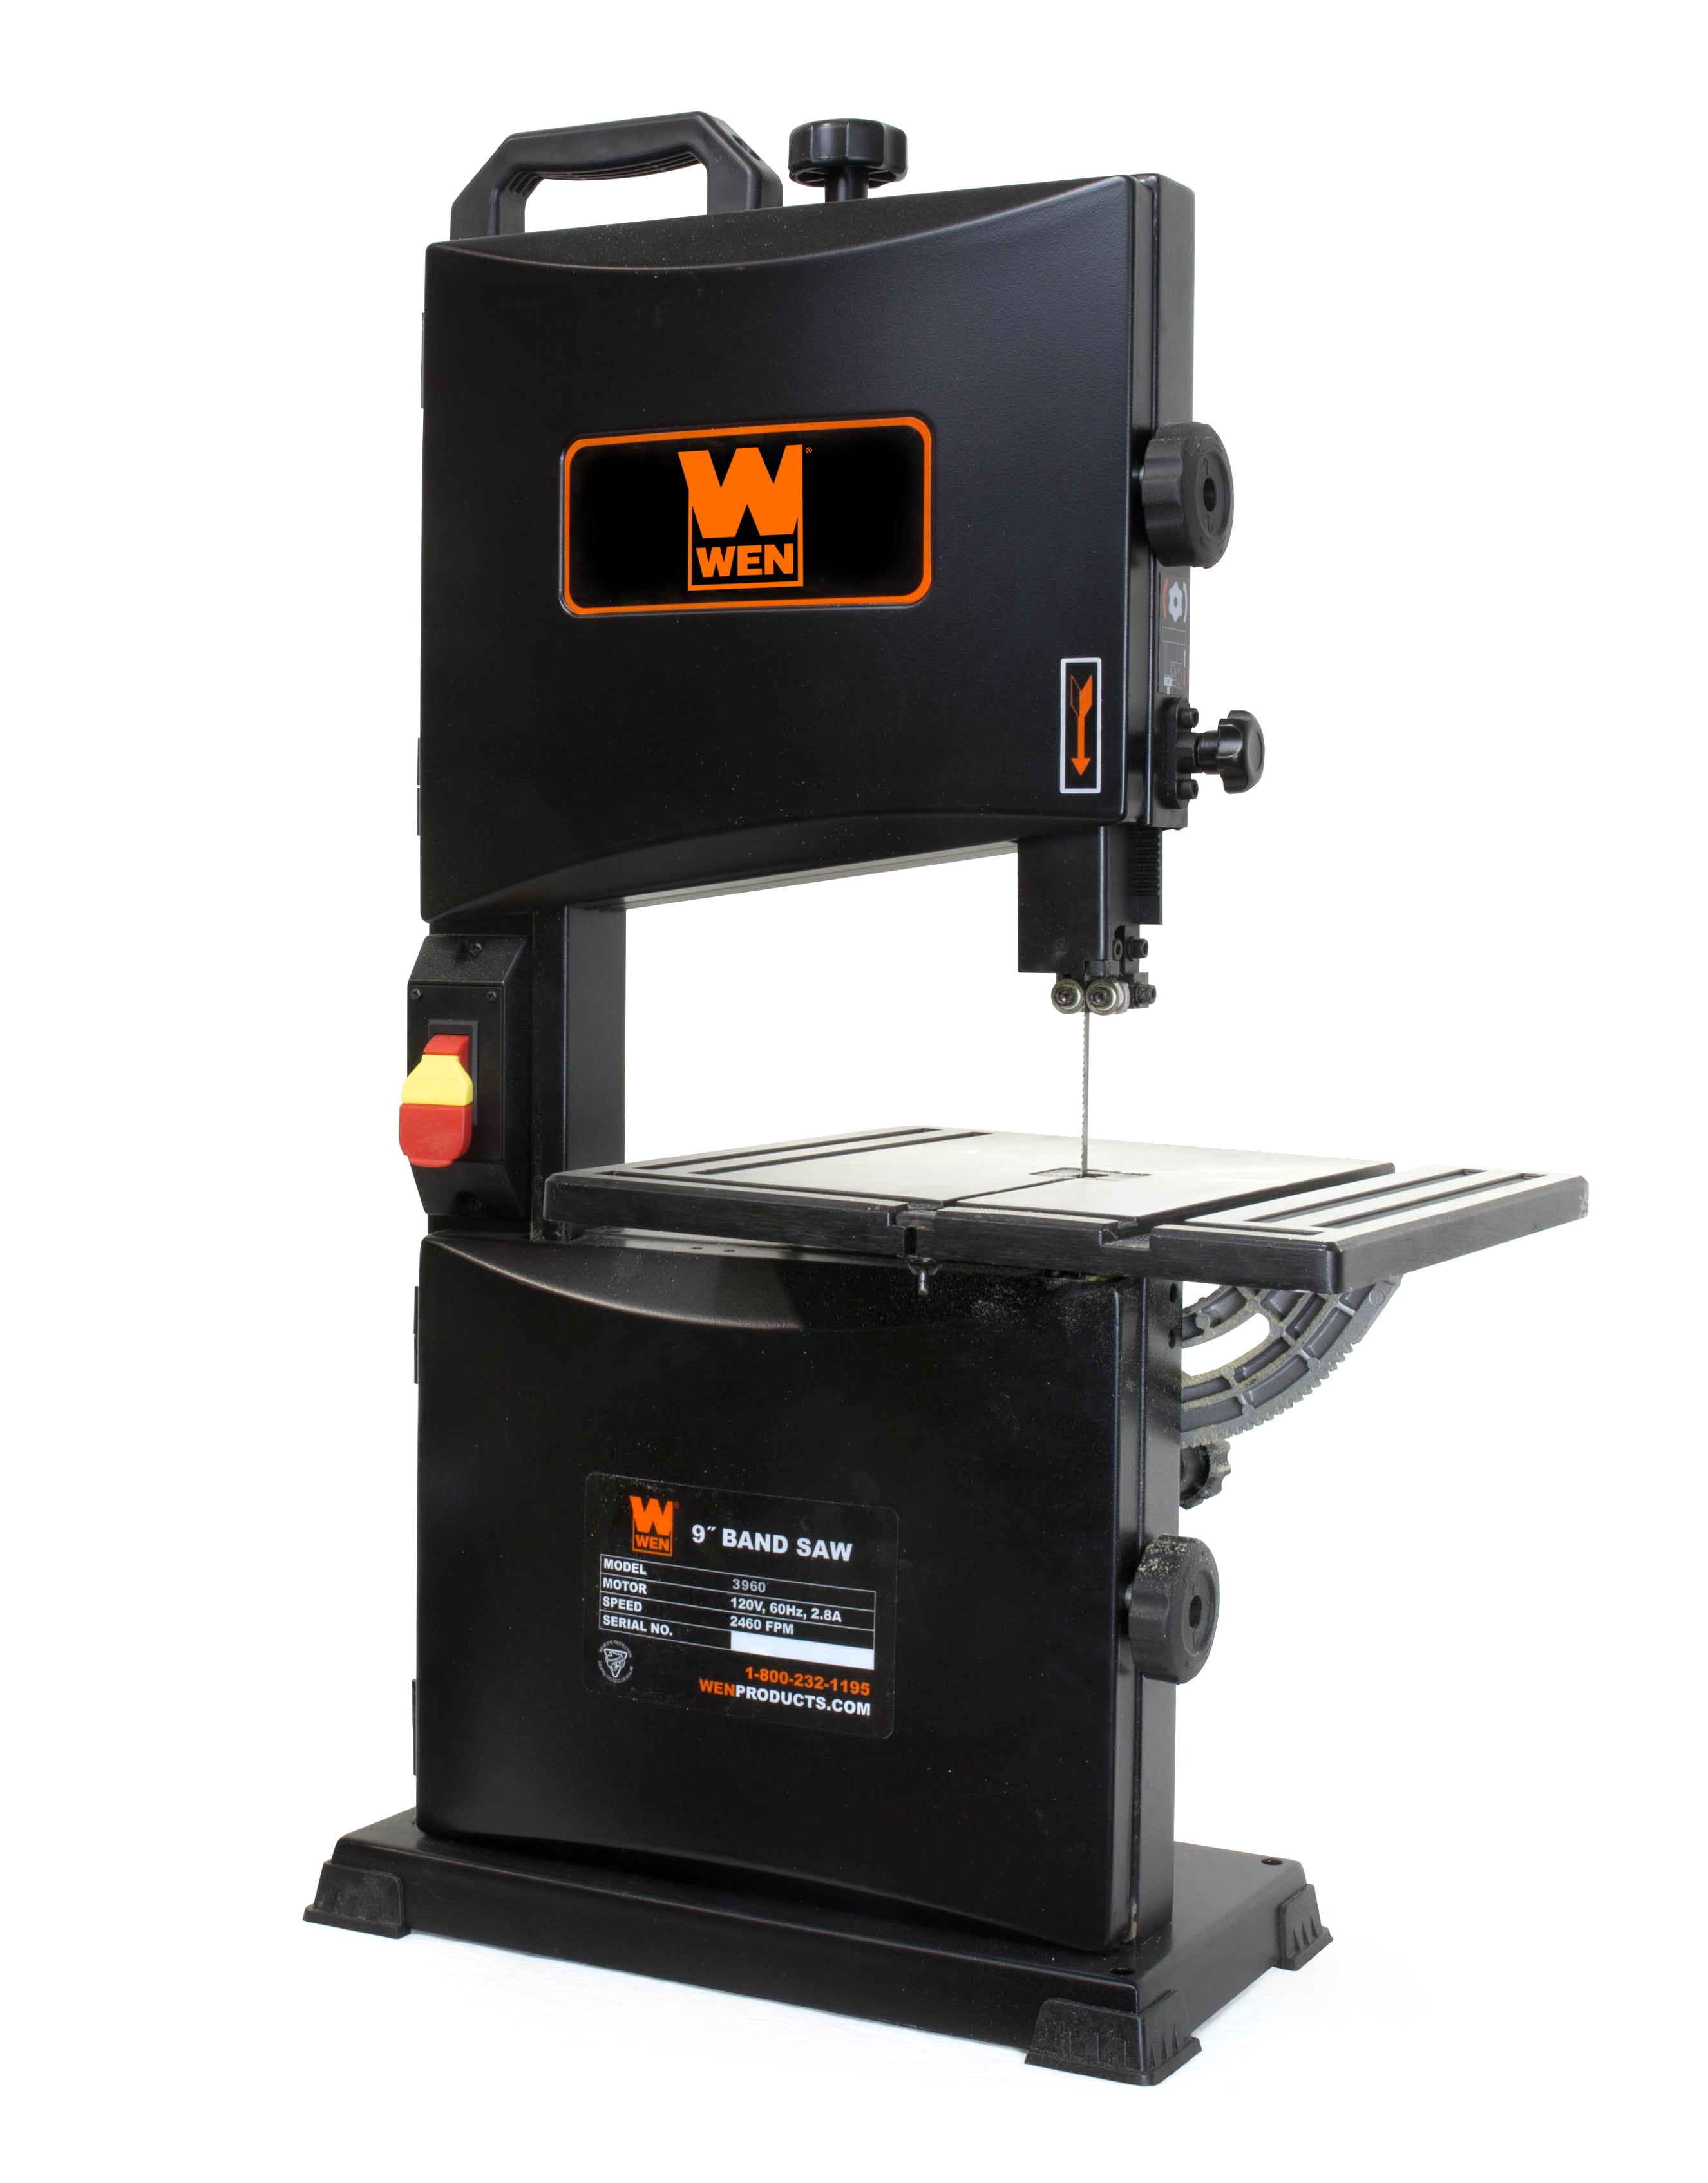 WEN 3959 2.5A Corded Benchtop Band Saw for sale online